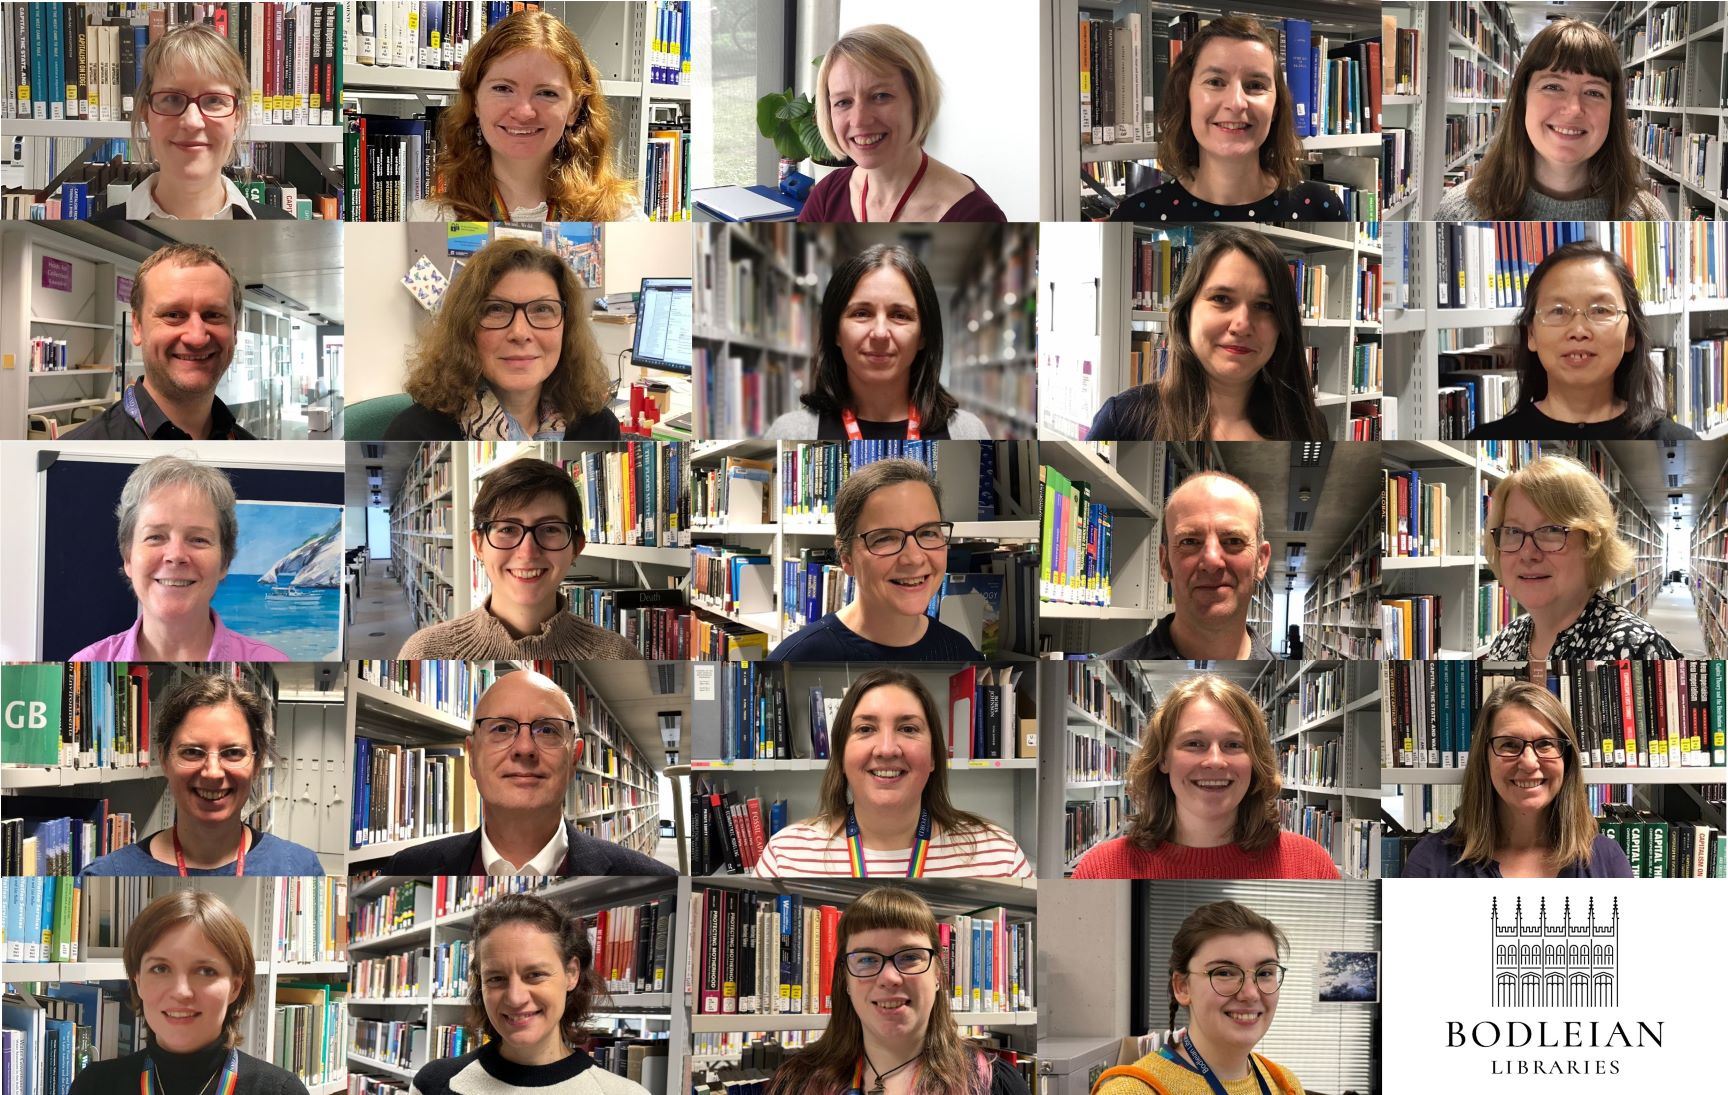 A composite image of photos of library staff at the Social Science Library